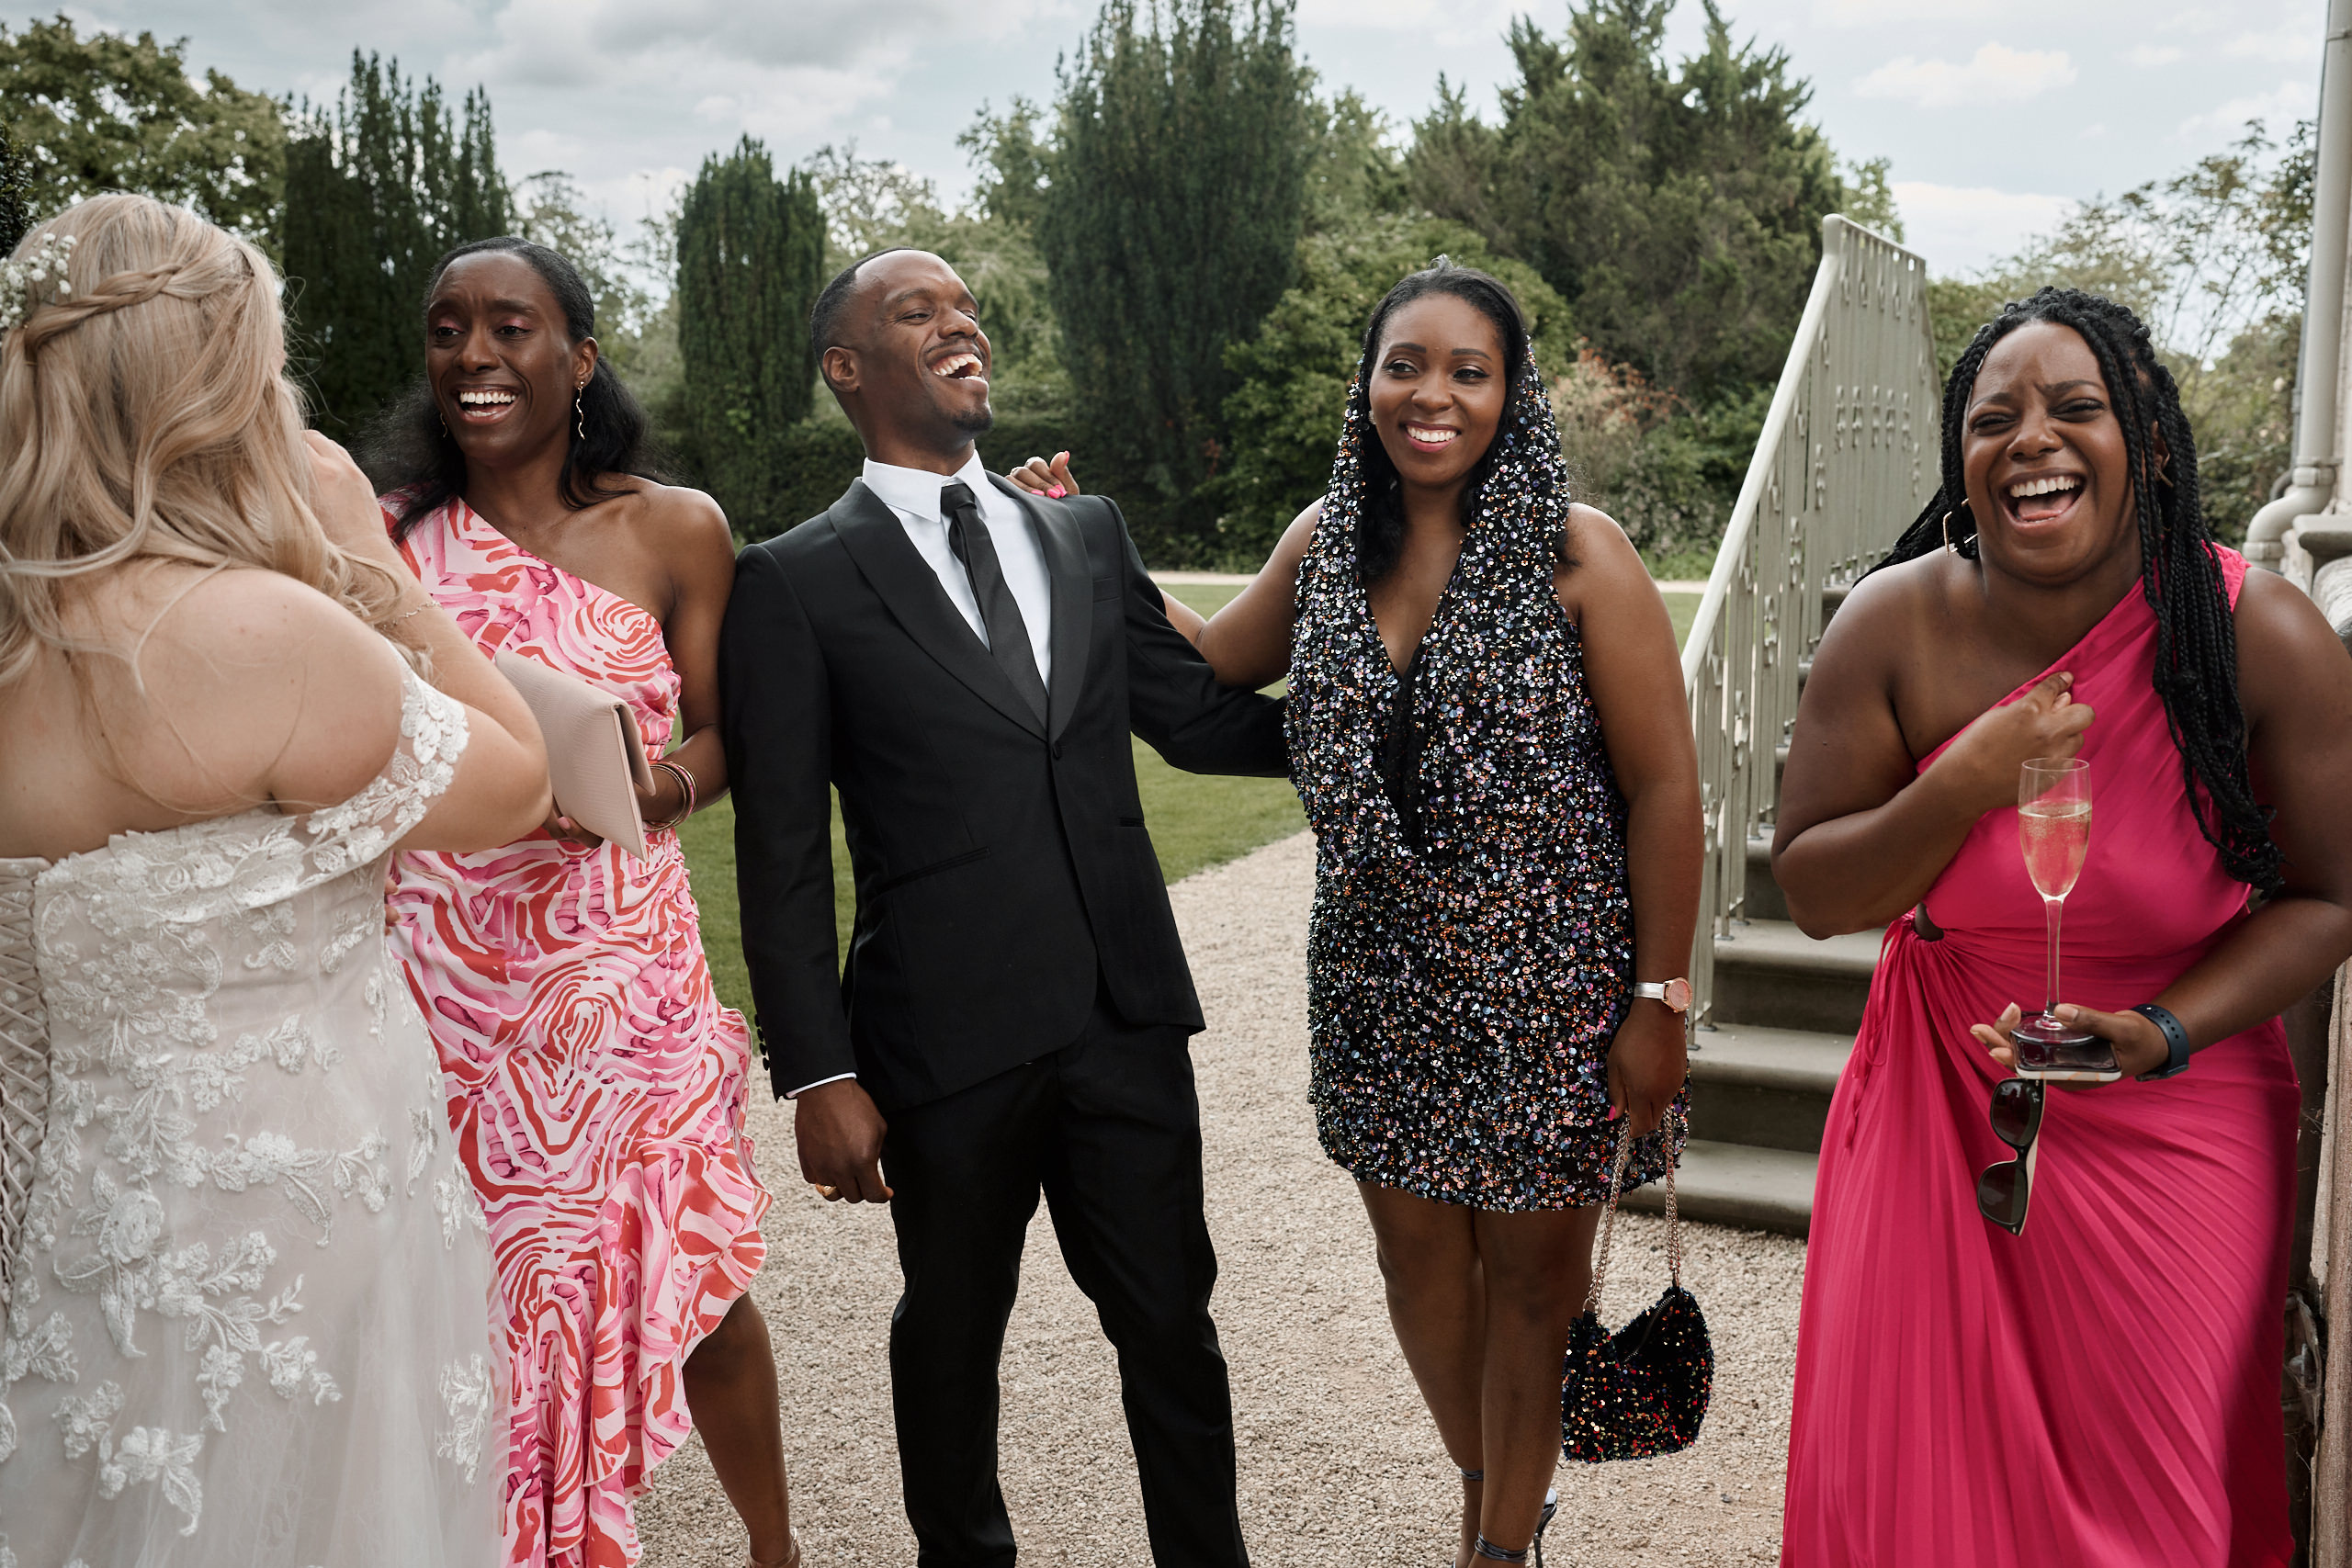 Some folks cracking up at a wedding.